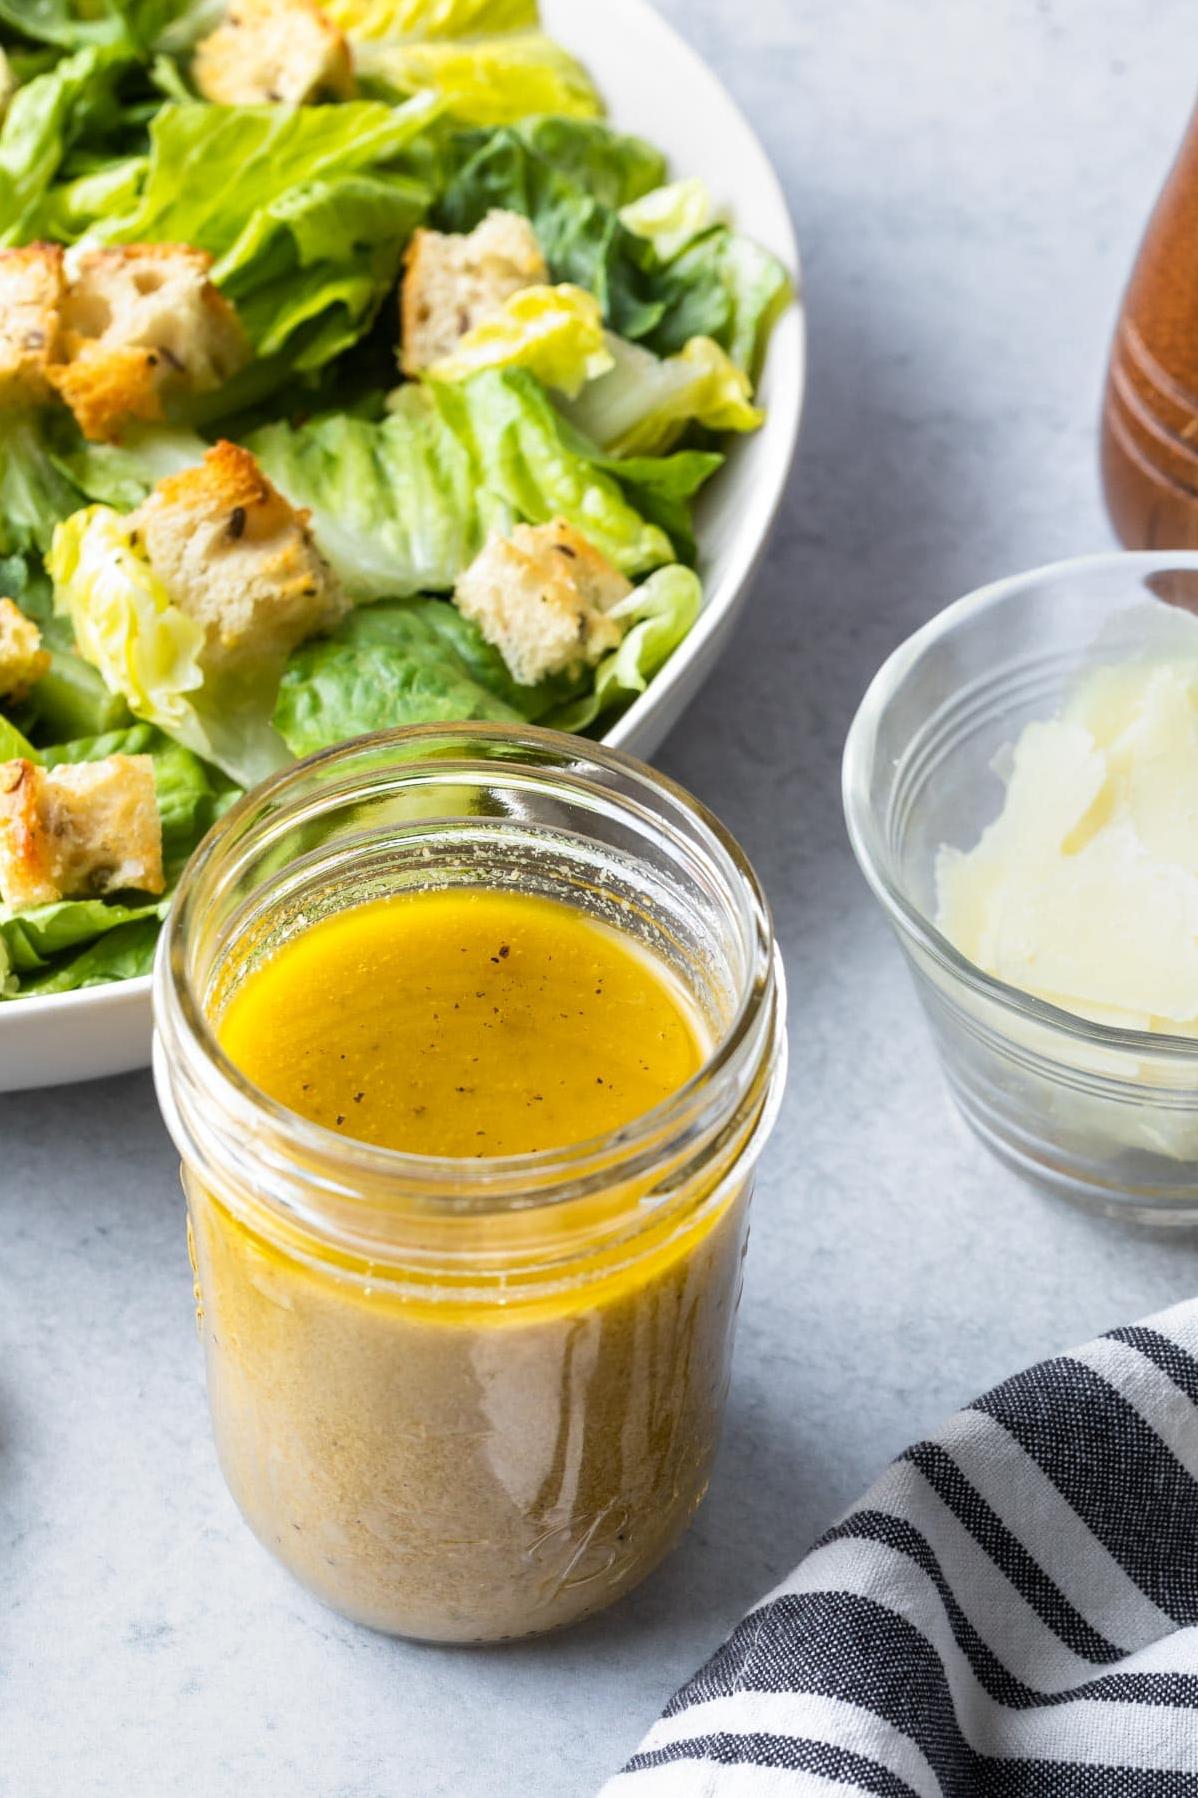  With this DIY salad dressing, you can kiss store-bought dressing goodbye!